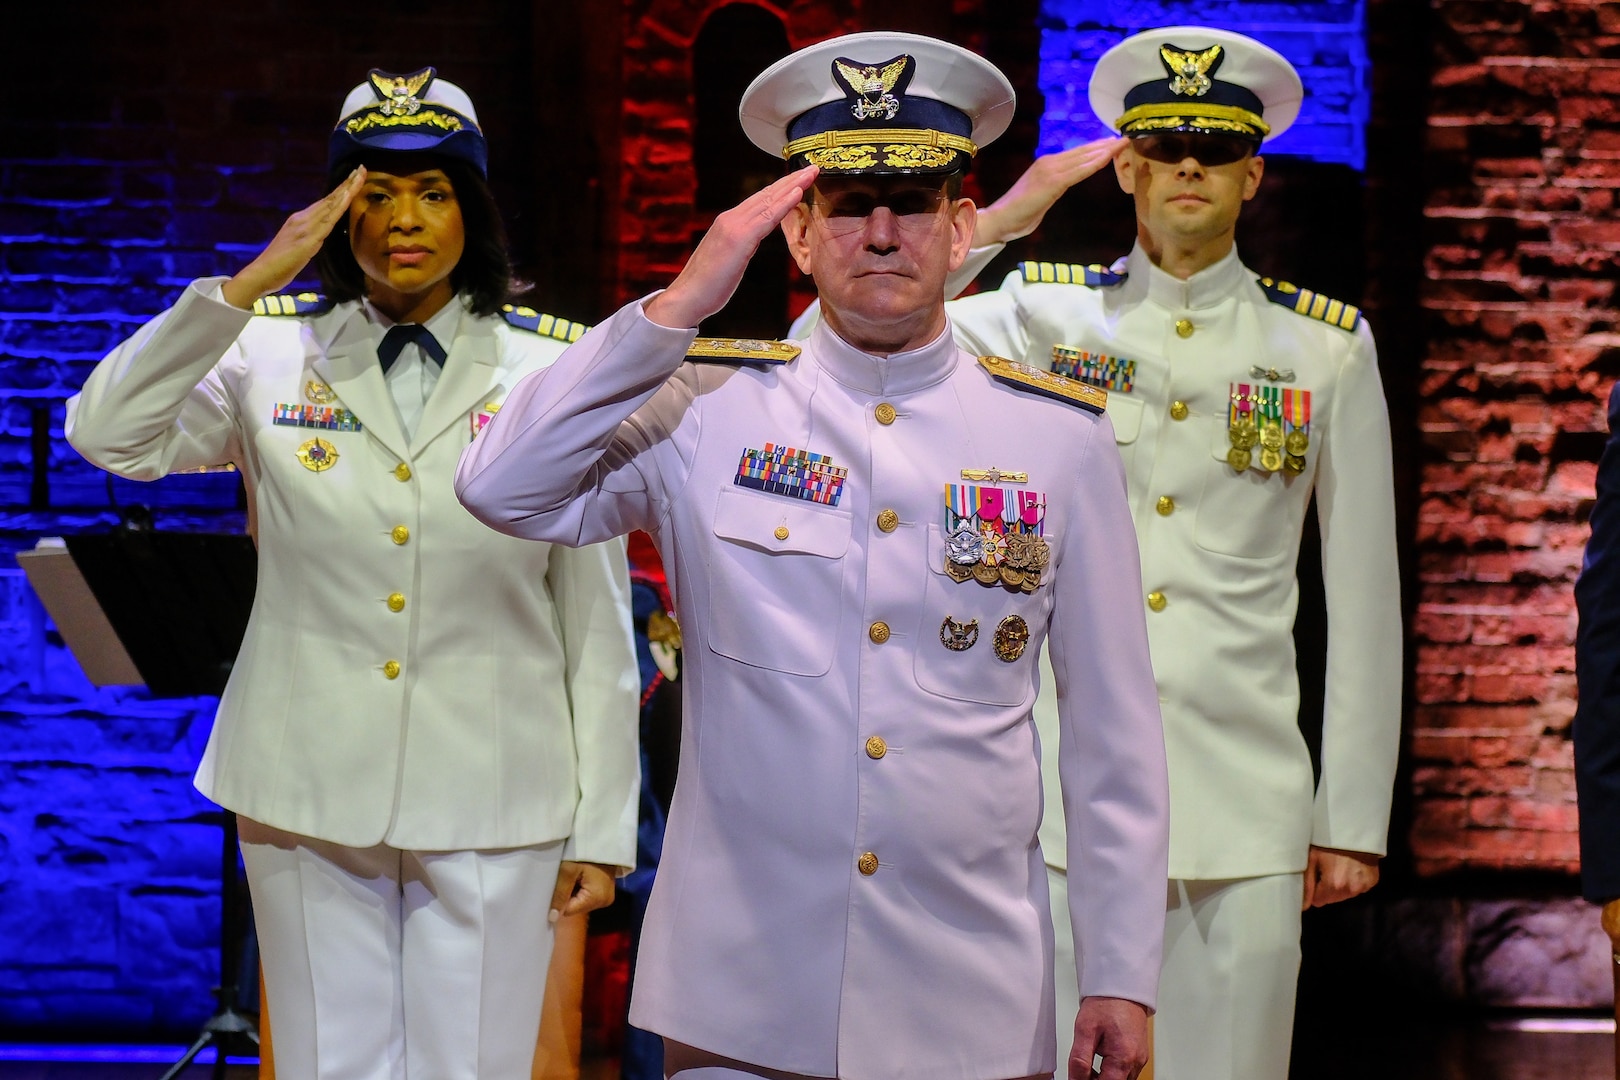 Rear Adm. John Mauger, the First Coast Guard District commander presides over Coast Guard Sector New York’s change-of-command ceremony at the Richard Rodgers Theatre in Manhattan, New York, April 22, 2024. Capt. Zeita Merchant transferred command of Coast Guard Sector New York to Capt. Jonathan Andrechik during the ceremony. (U.S. Coast Guard photo by Petty Officer 2nd Class Ryan Schultz)